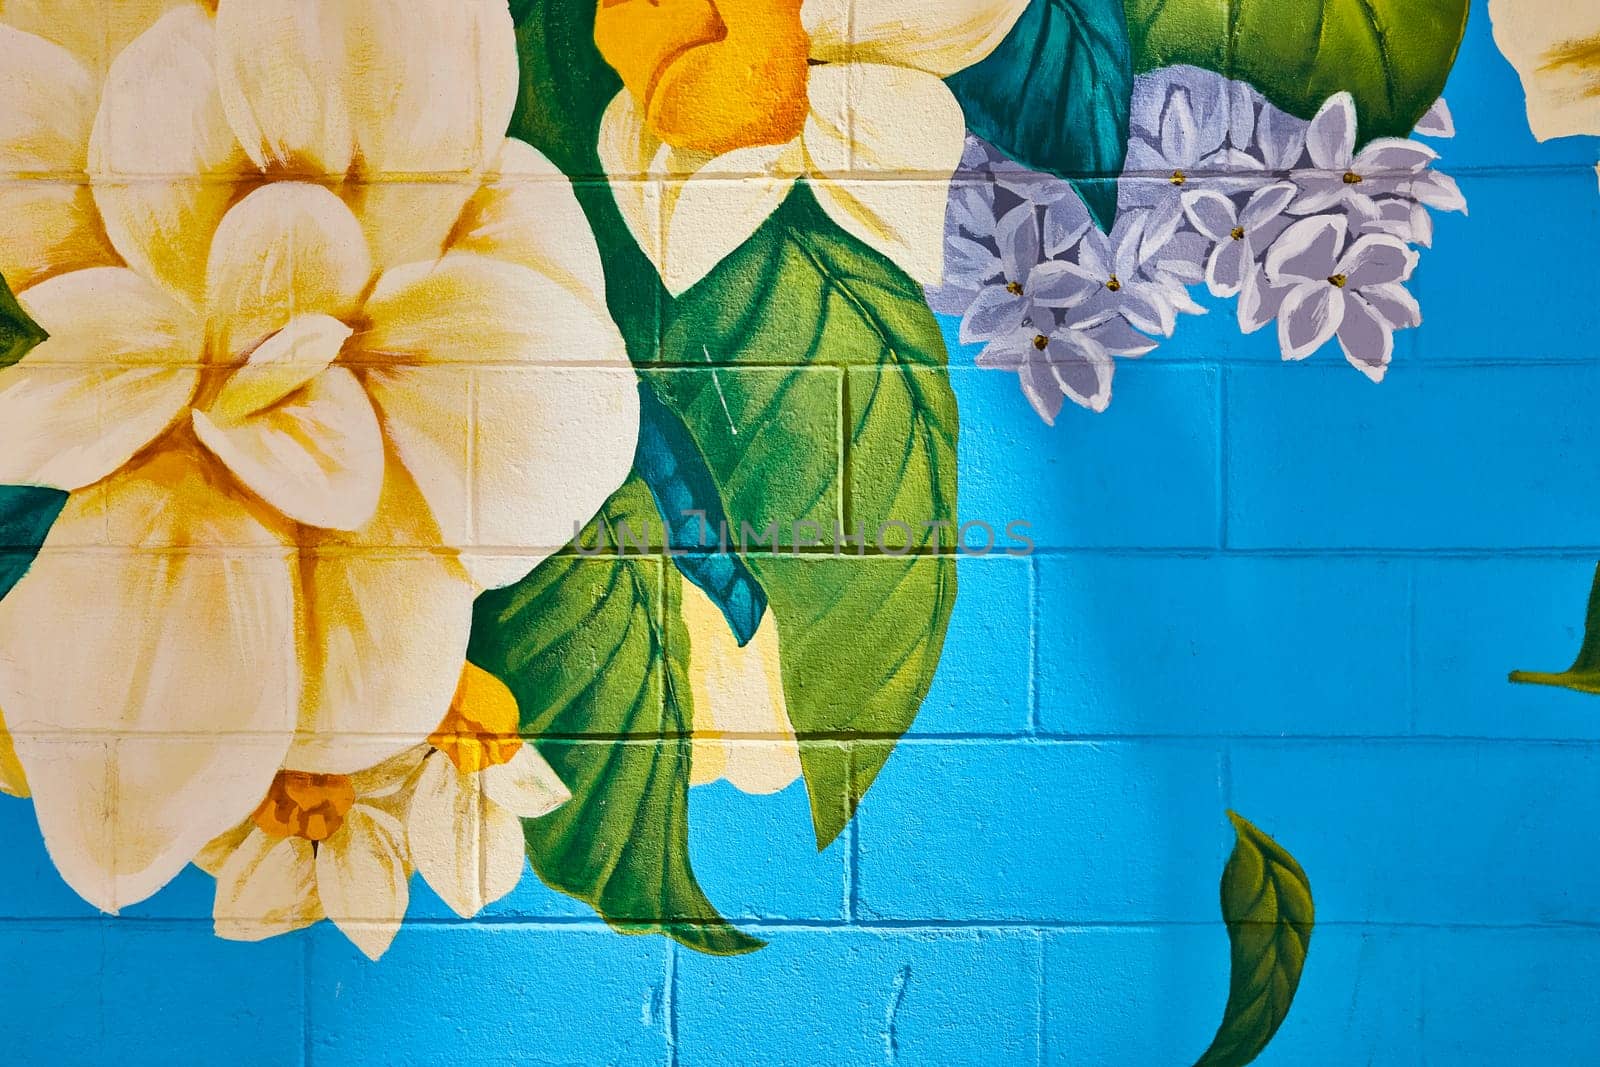 Vibrant floral mural on a blue brick wall in downtown Fort Wayne, adding color and life to the urban space.